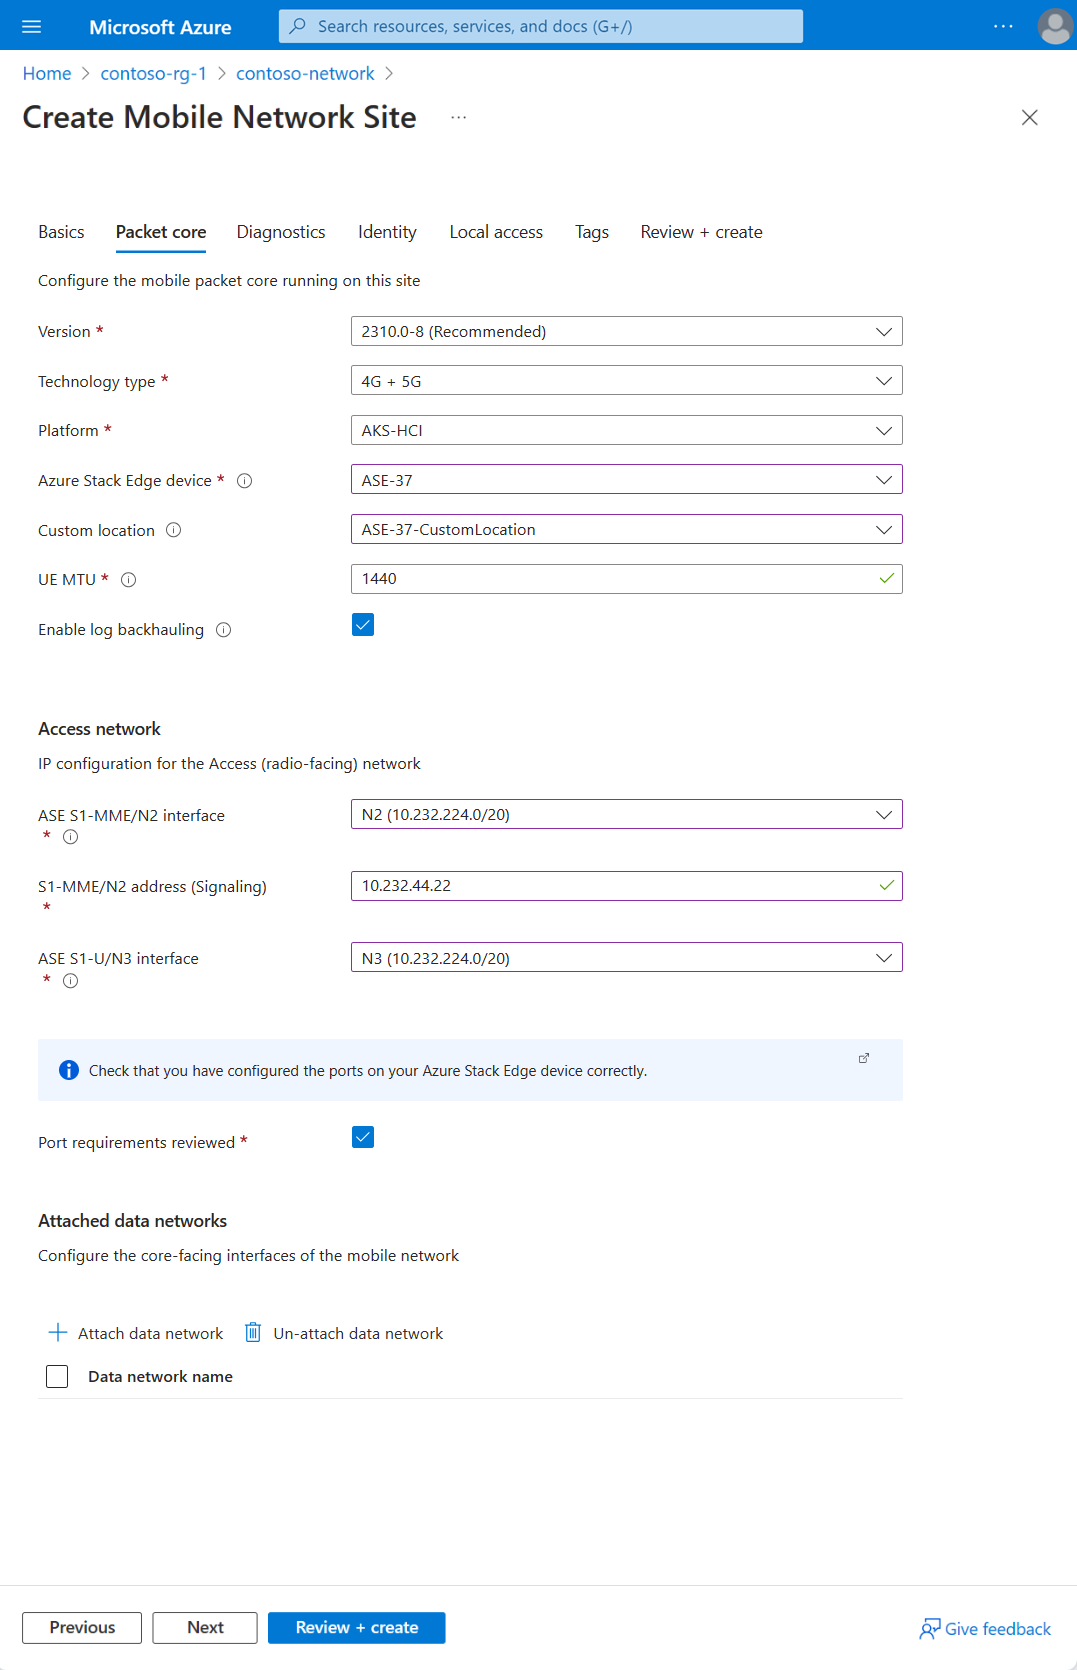 Screenshot of the Azure portal showing the Packet core configuration tab for a site resource.